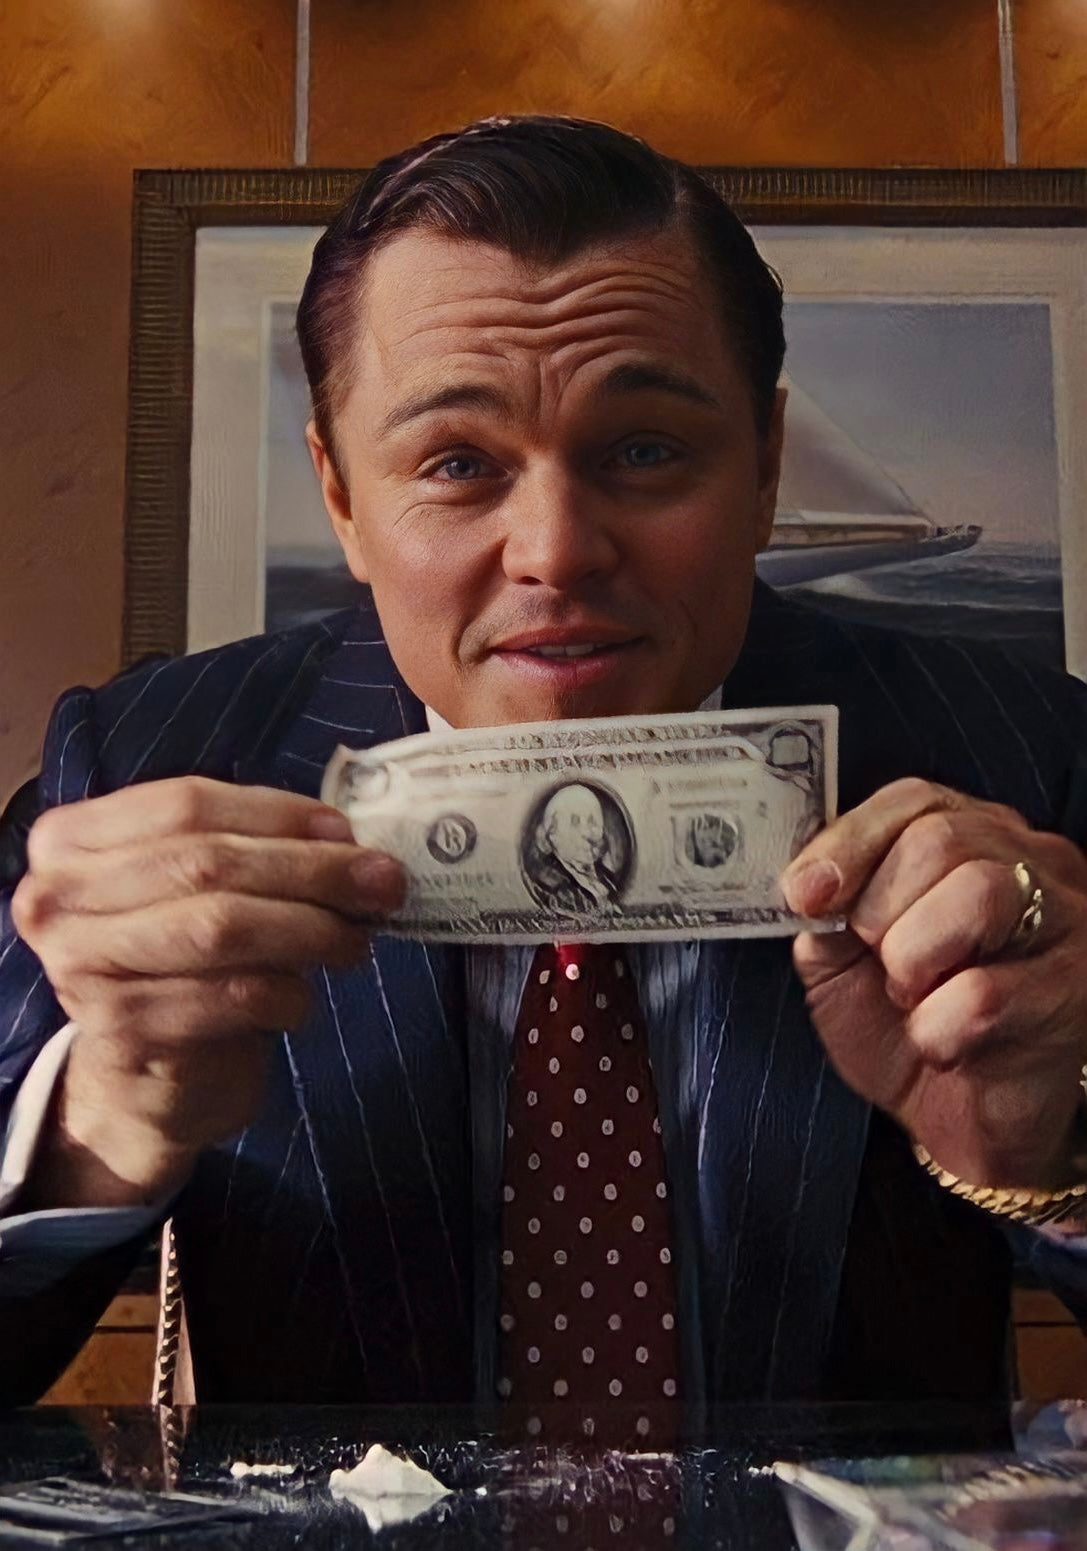 the wolf of wall street poster